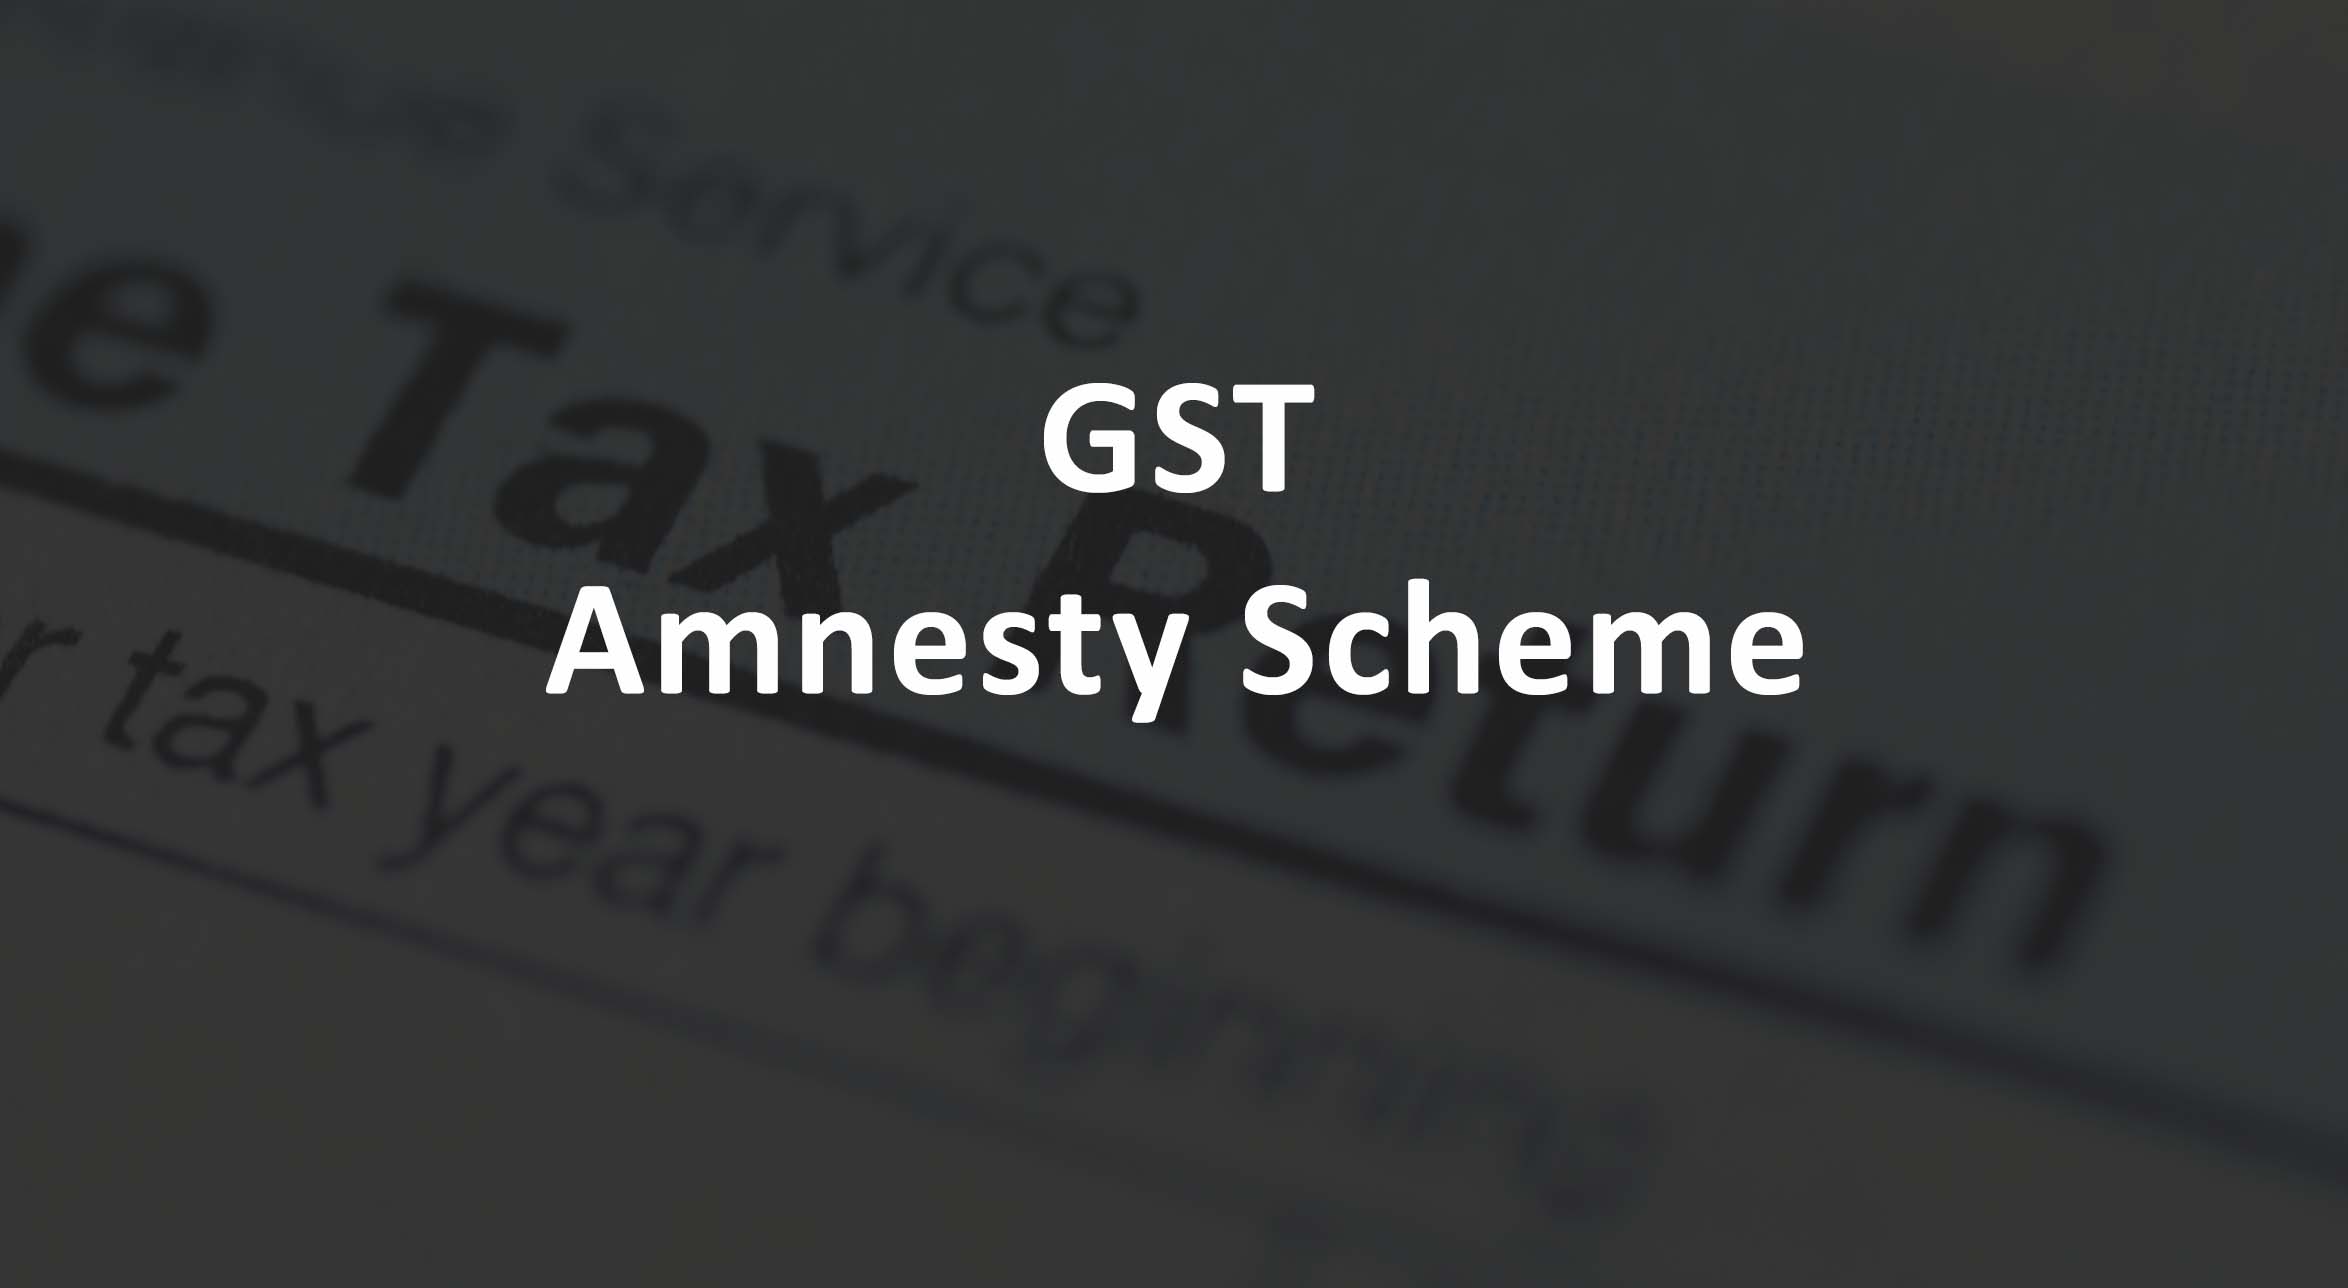 50,000 taxpayers in Kerala to benefit from GST amnesty scheme